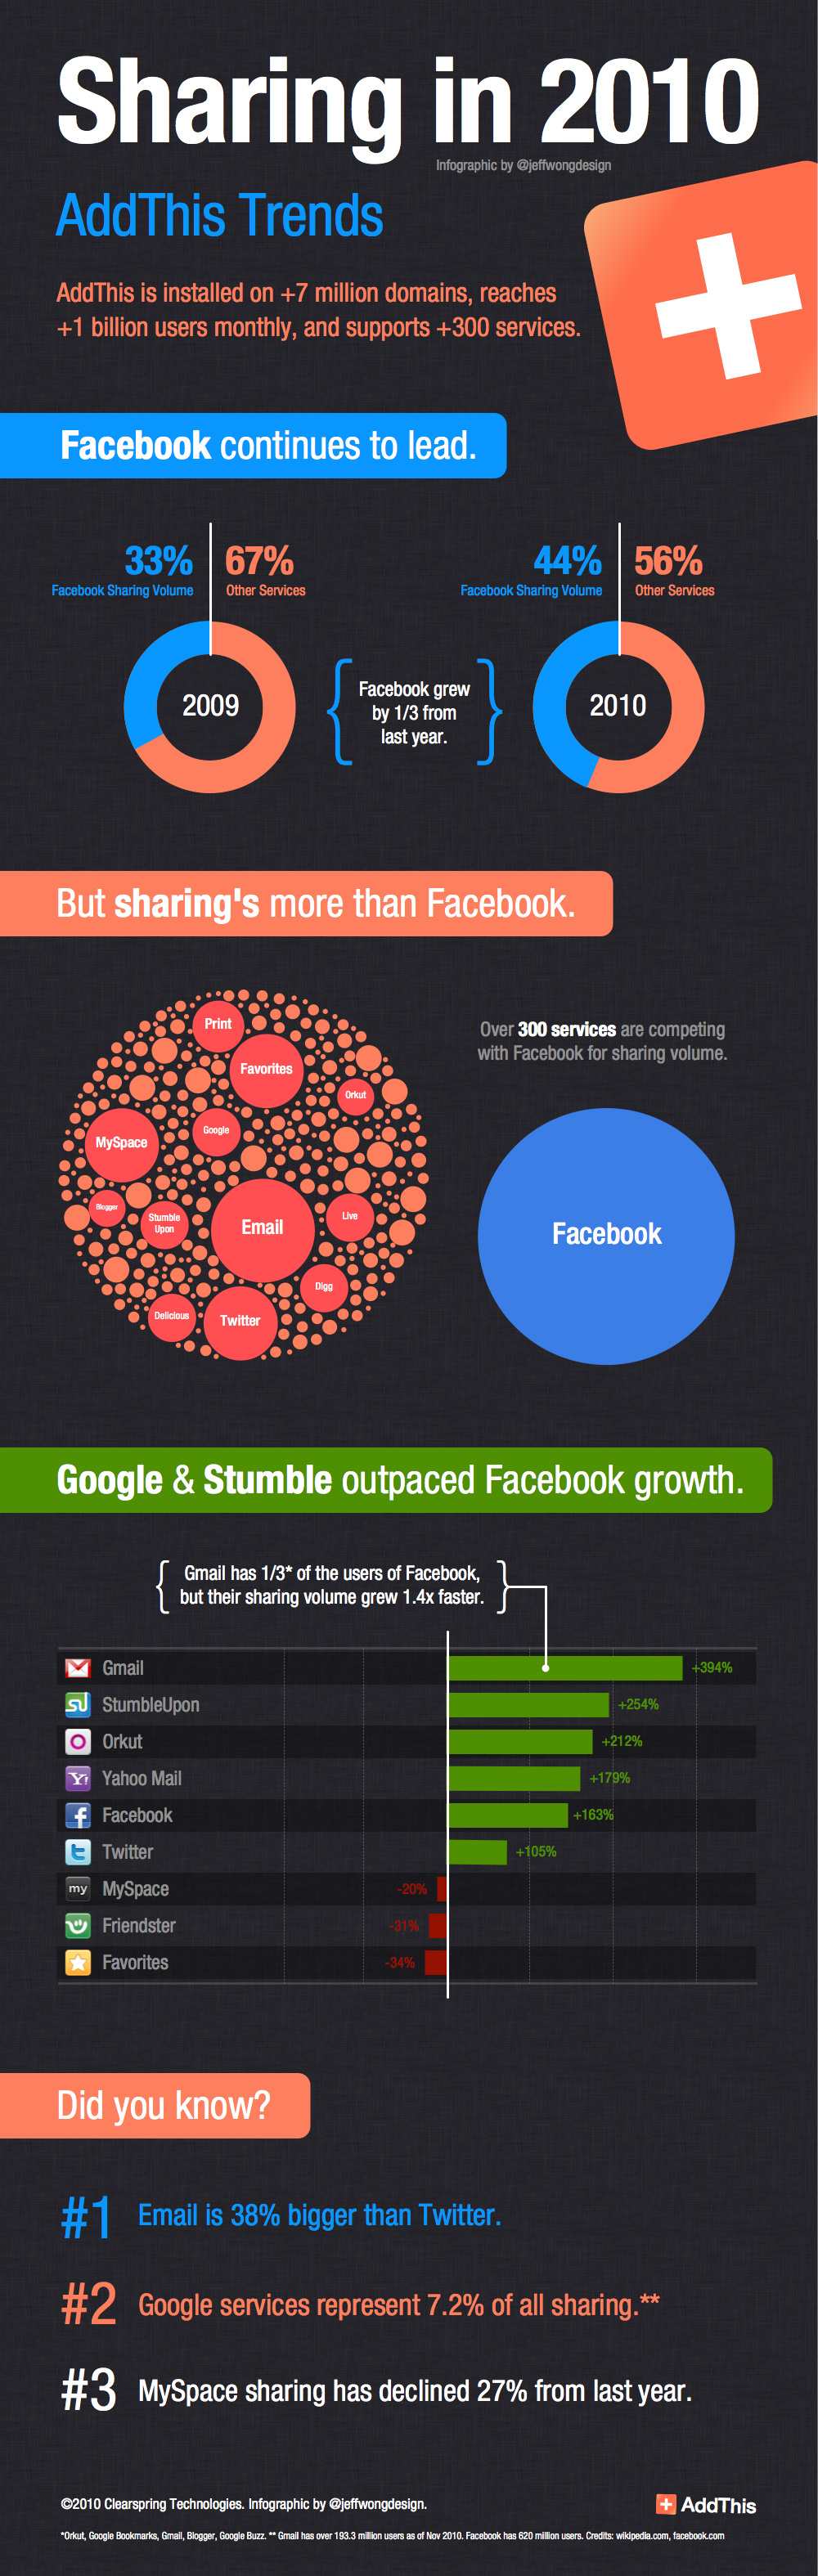 sharing-trends-infographic